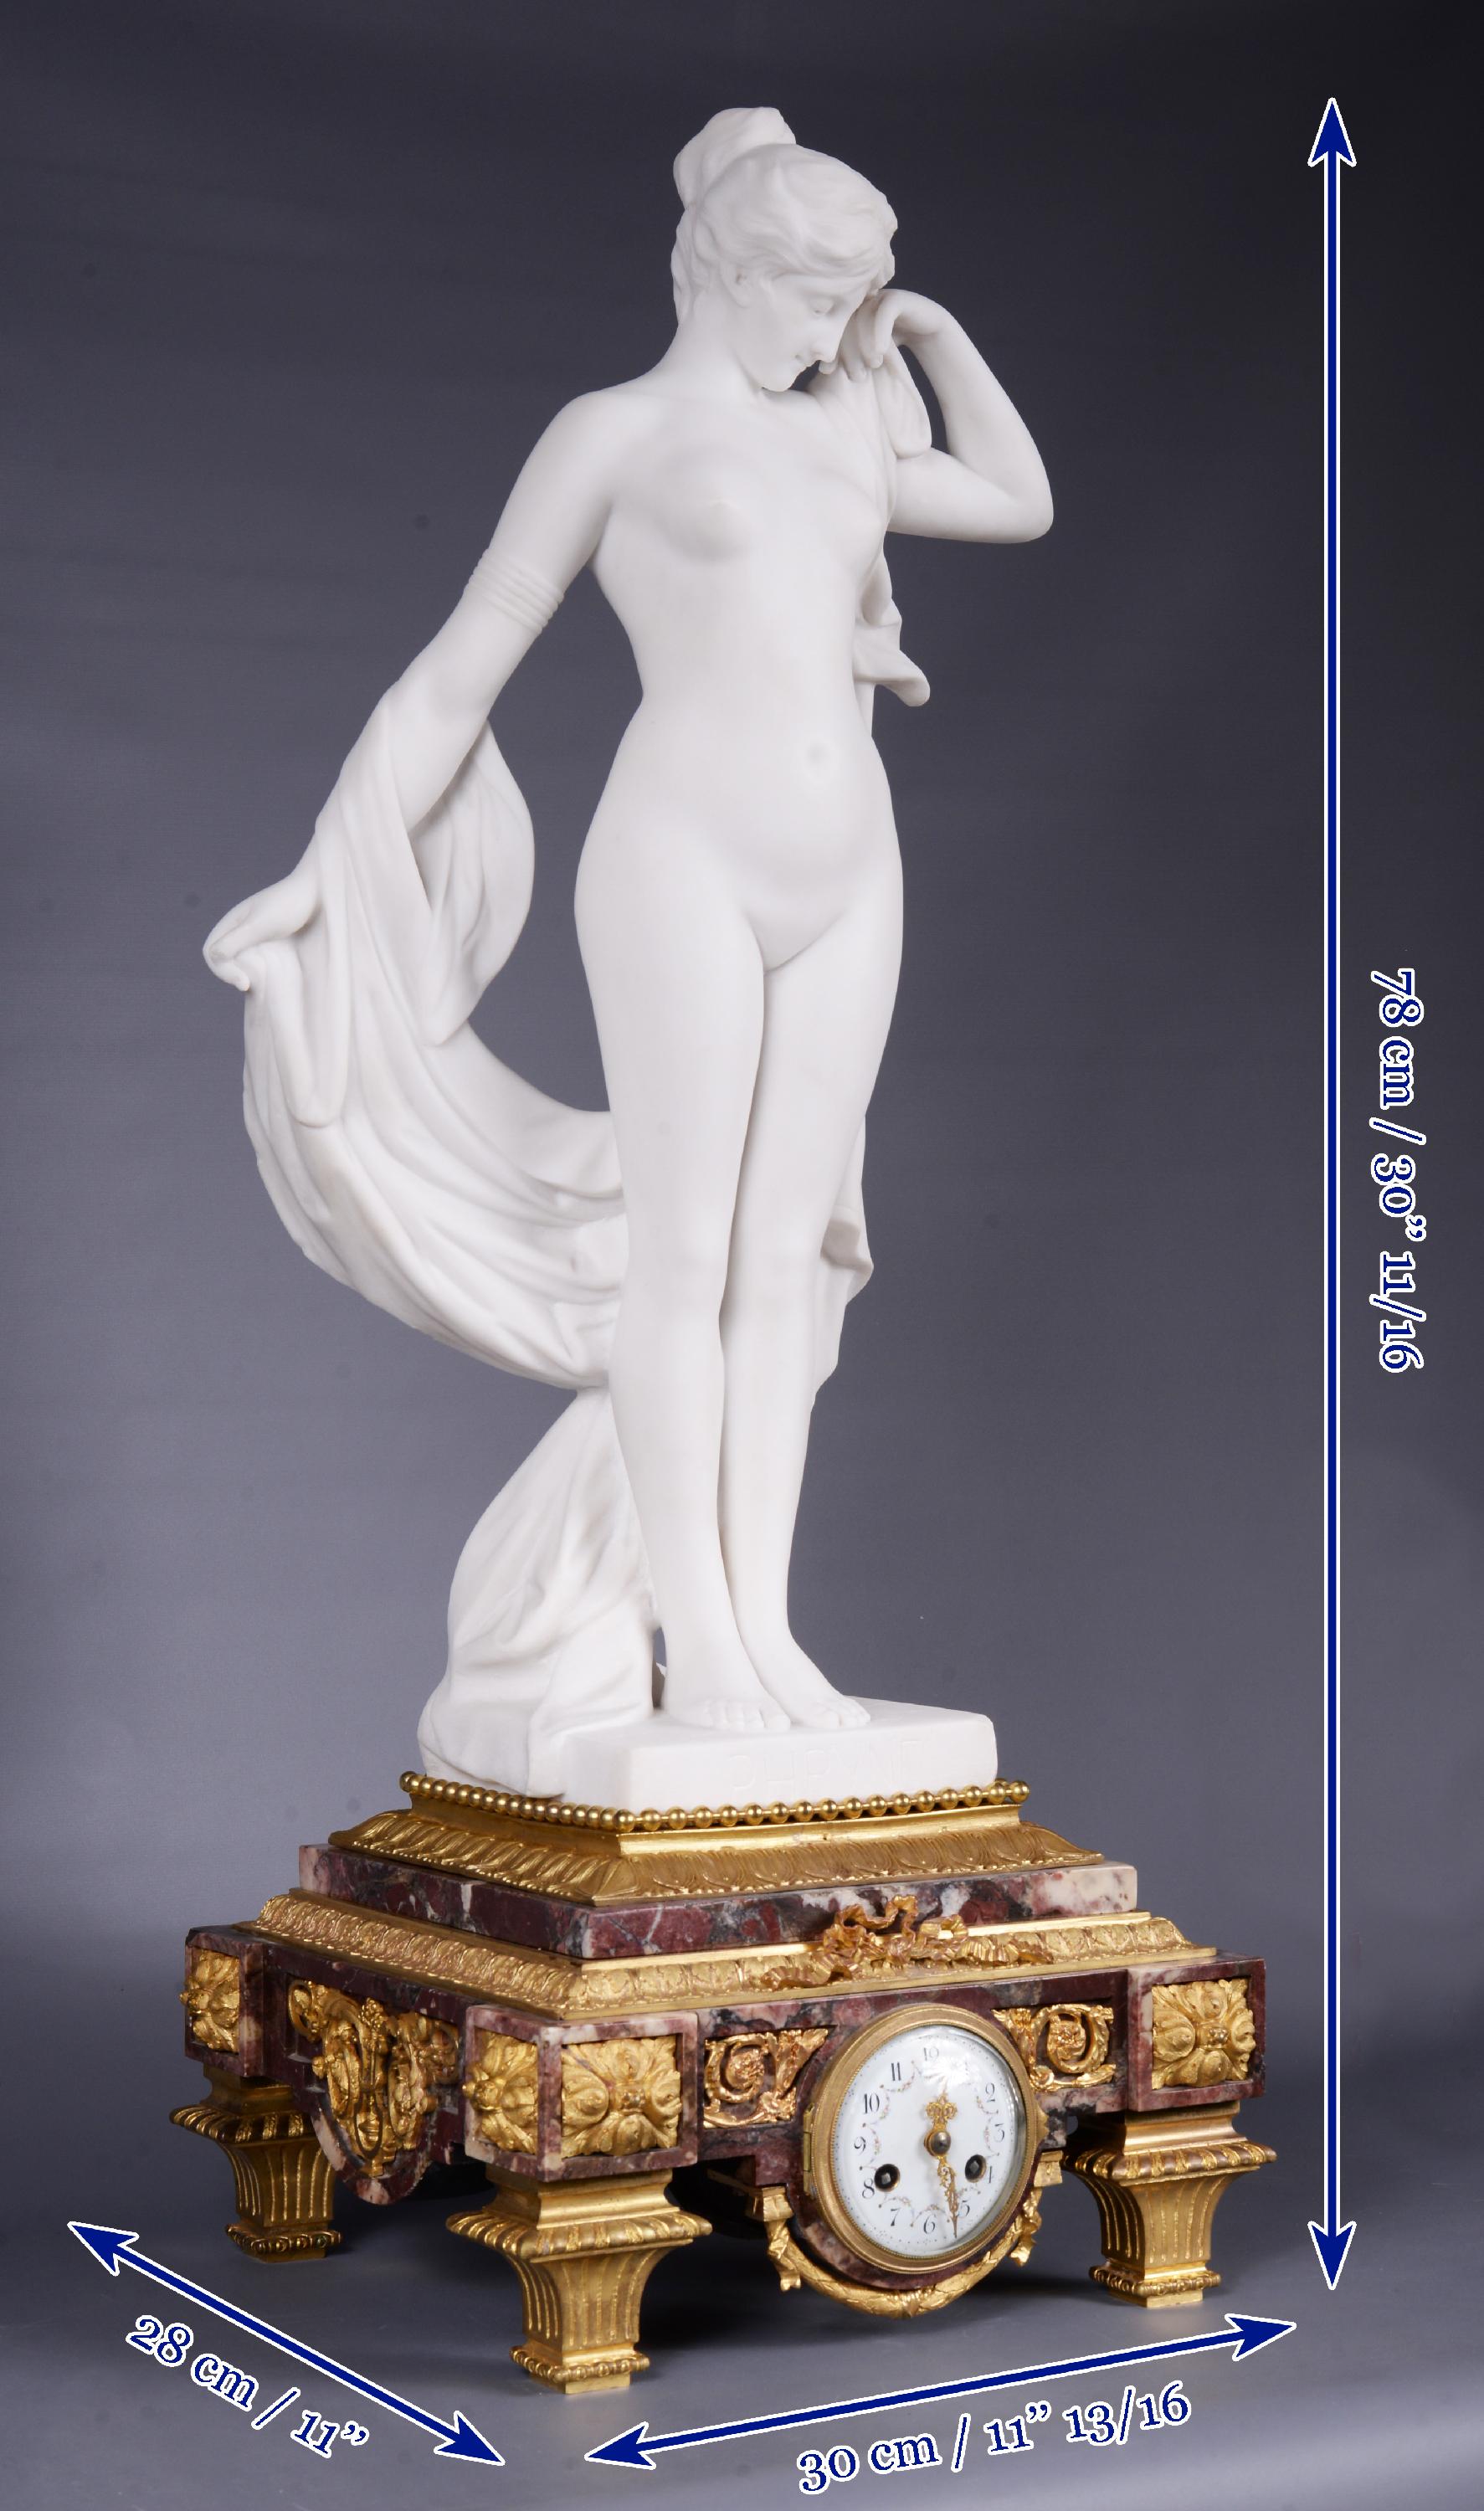 Marble and gilt bronze clock surmounted by a statuary white marble sculpture 8